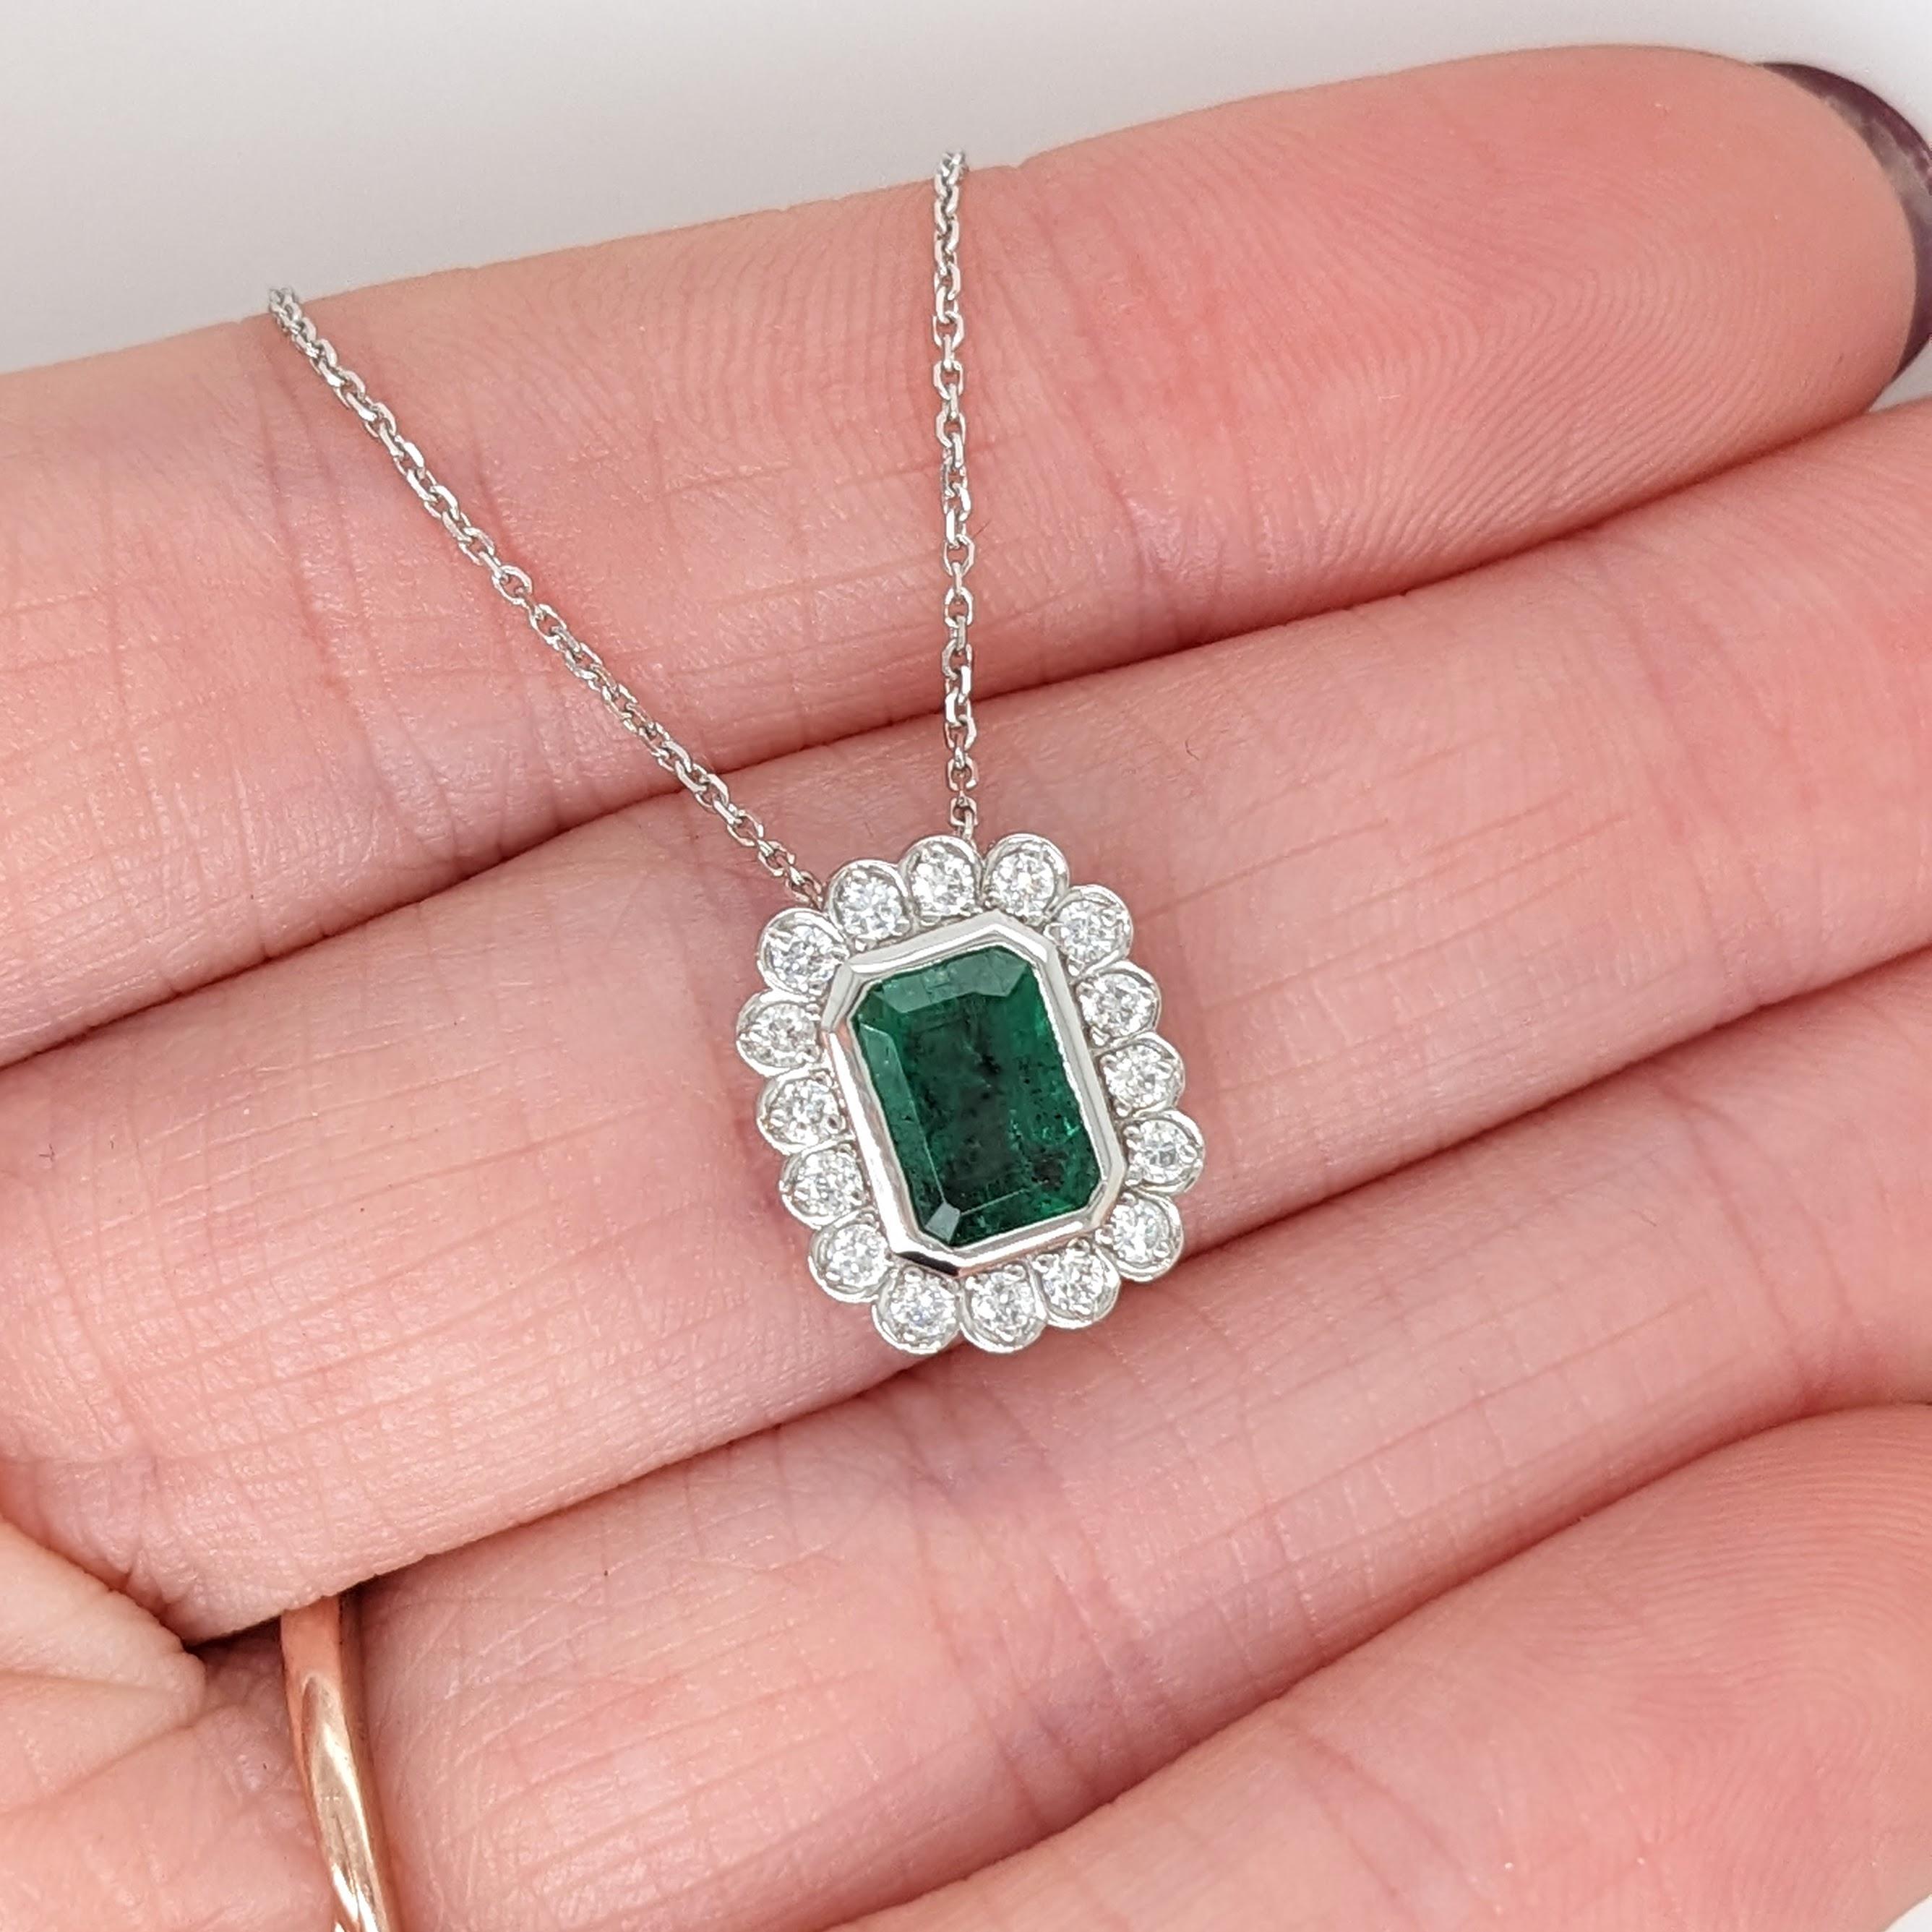 This classic slide pendant necklace features a 1.26 carat emerald with a halo of round natural earth mined diamonds all set in 14K white gold. This pendant nacklace makes a beautiful May birthstone gift for your loved ones! 

Specifications

Item